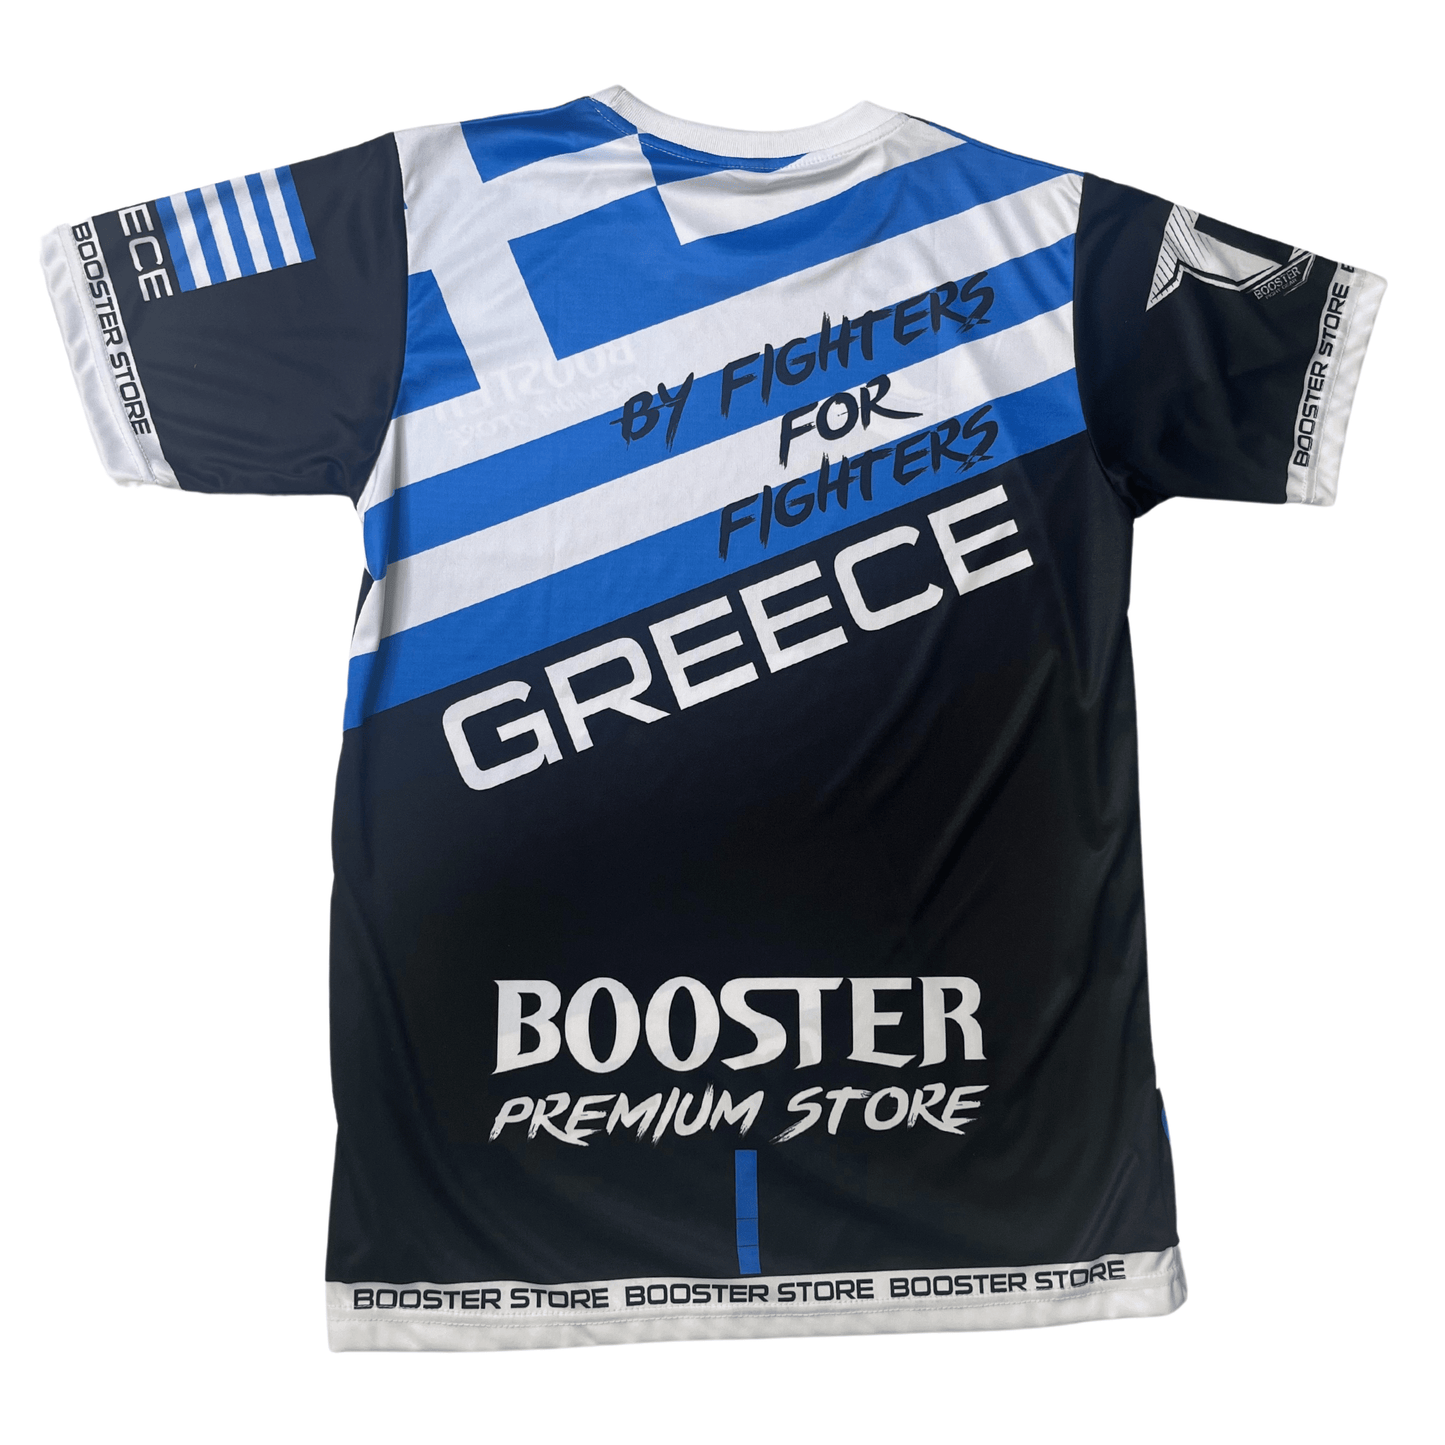 Greece Booster Fight Shirt - Booster Fight Store